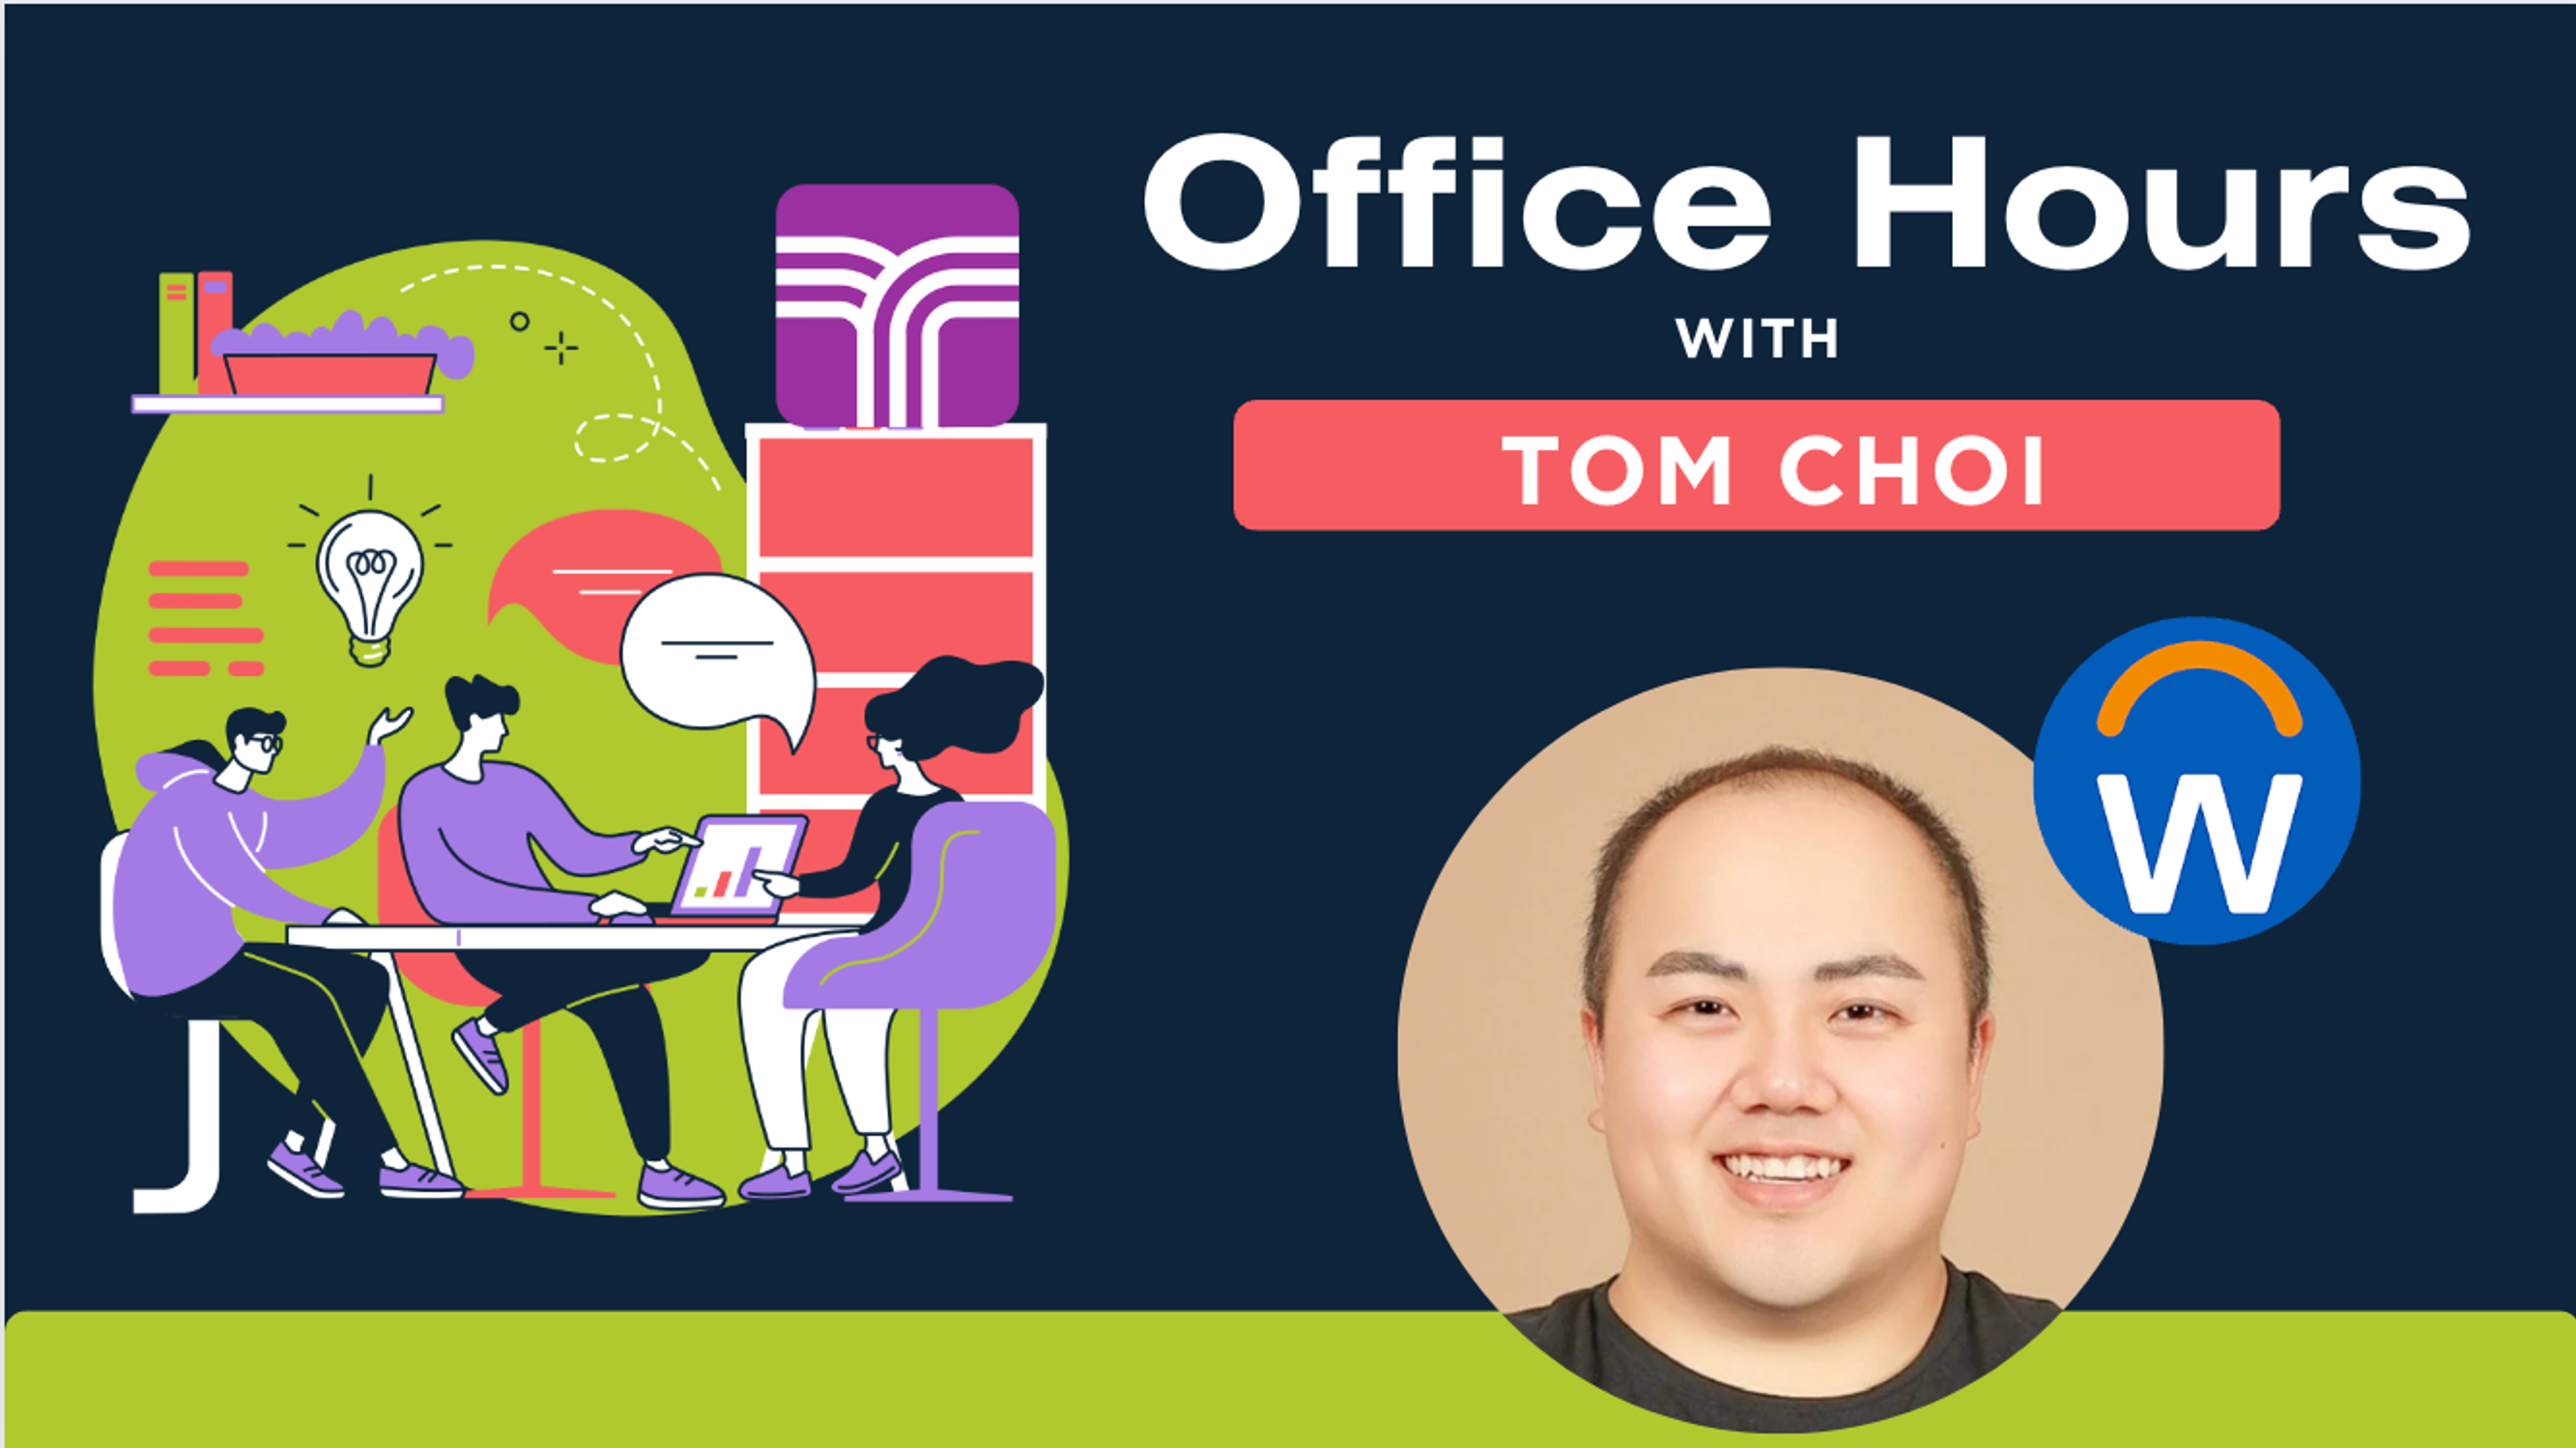 Office Hours with Tom Choi - Workday Software Engineer event